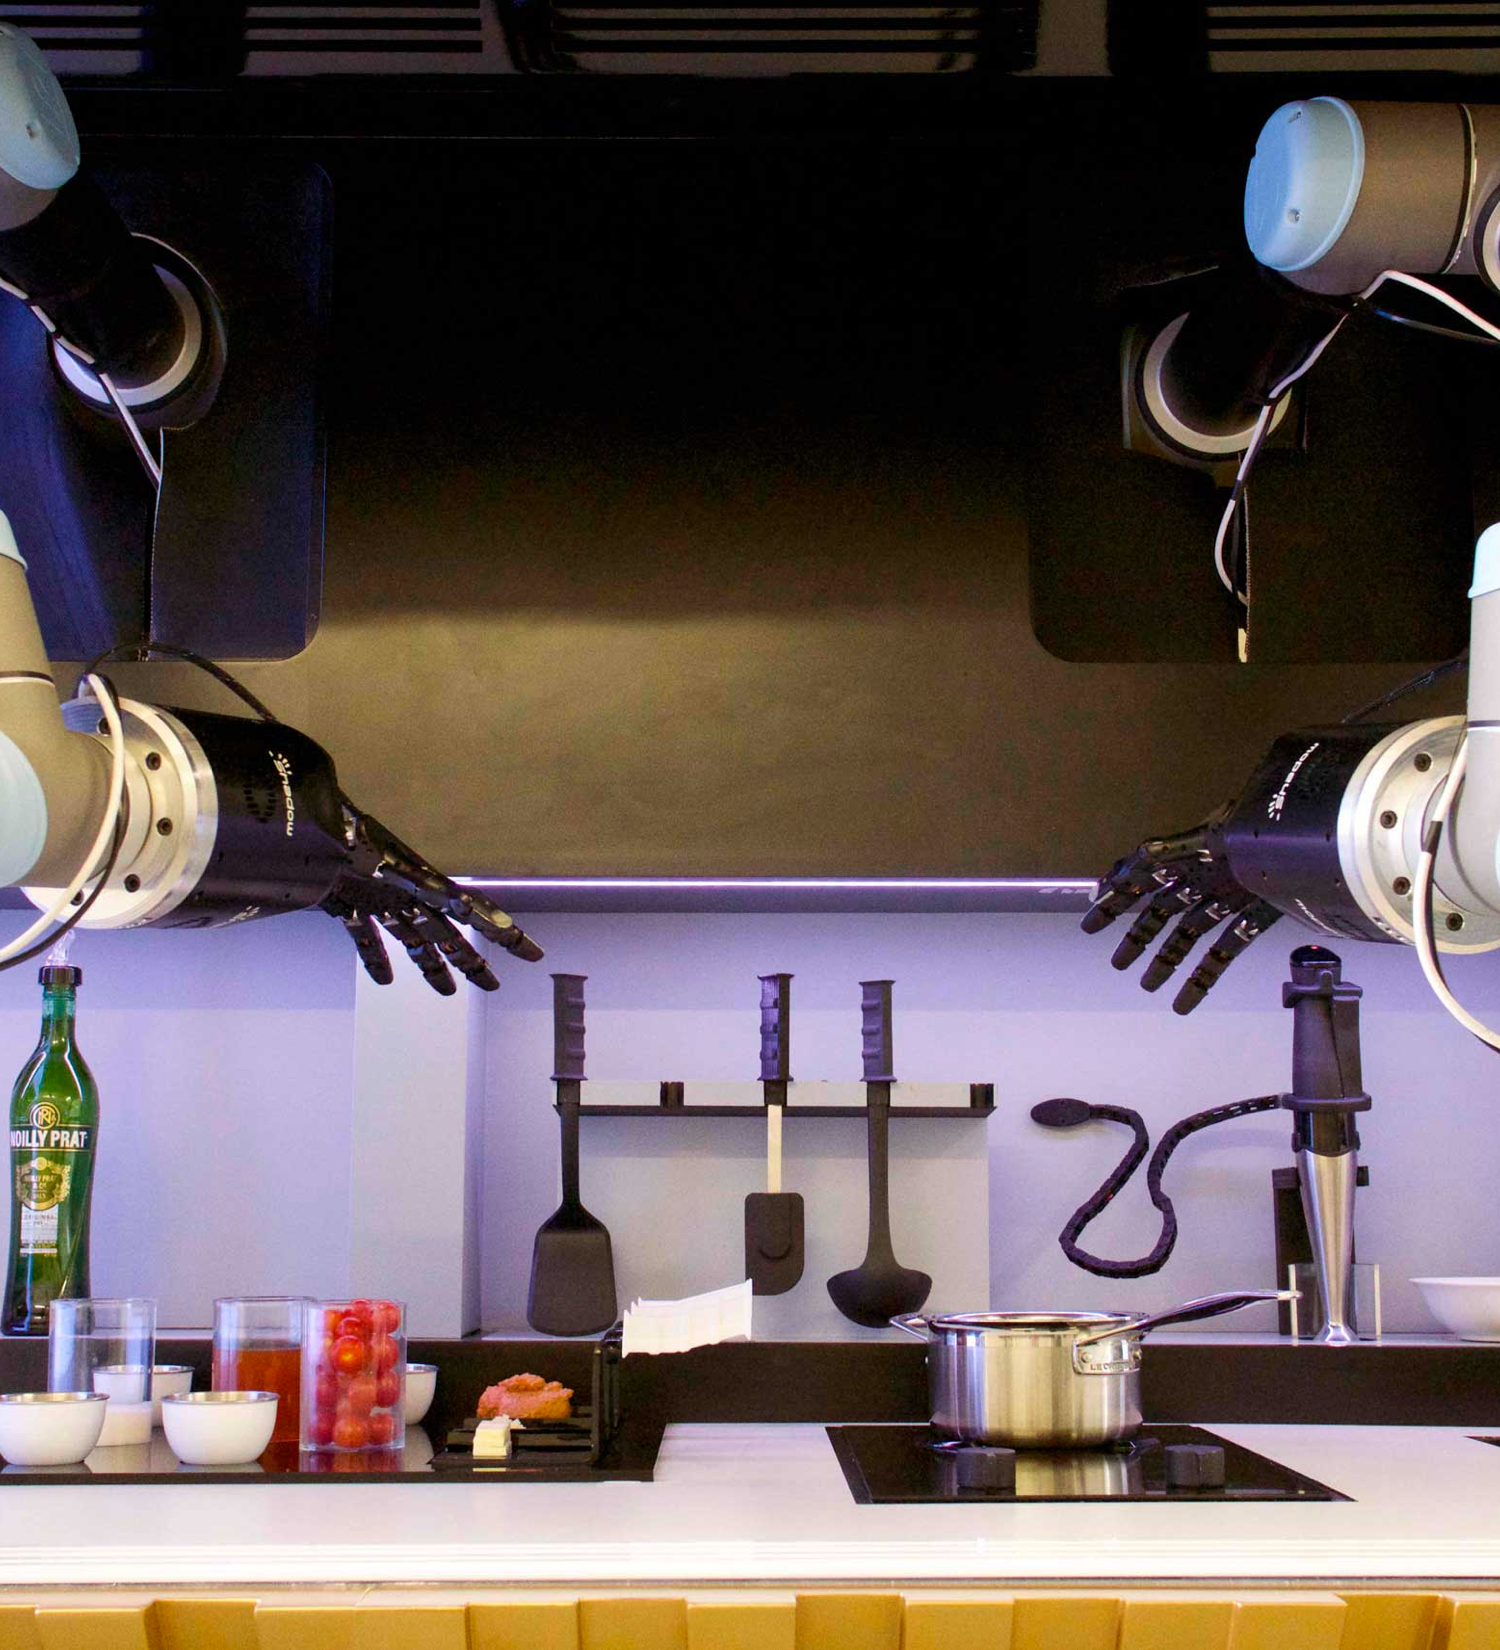 Robot cooking in the kitchen